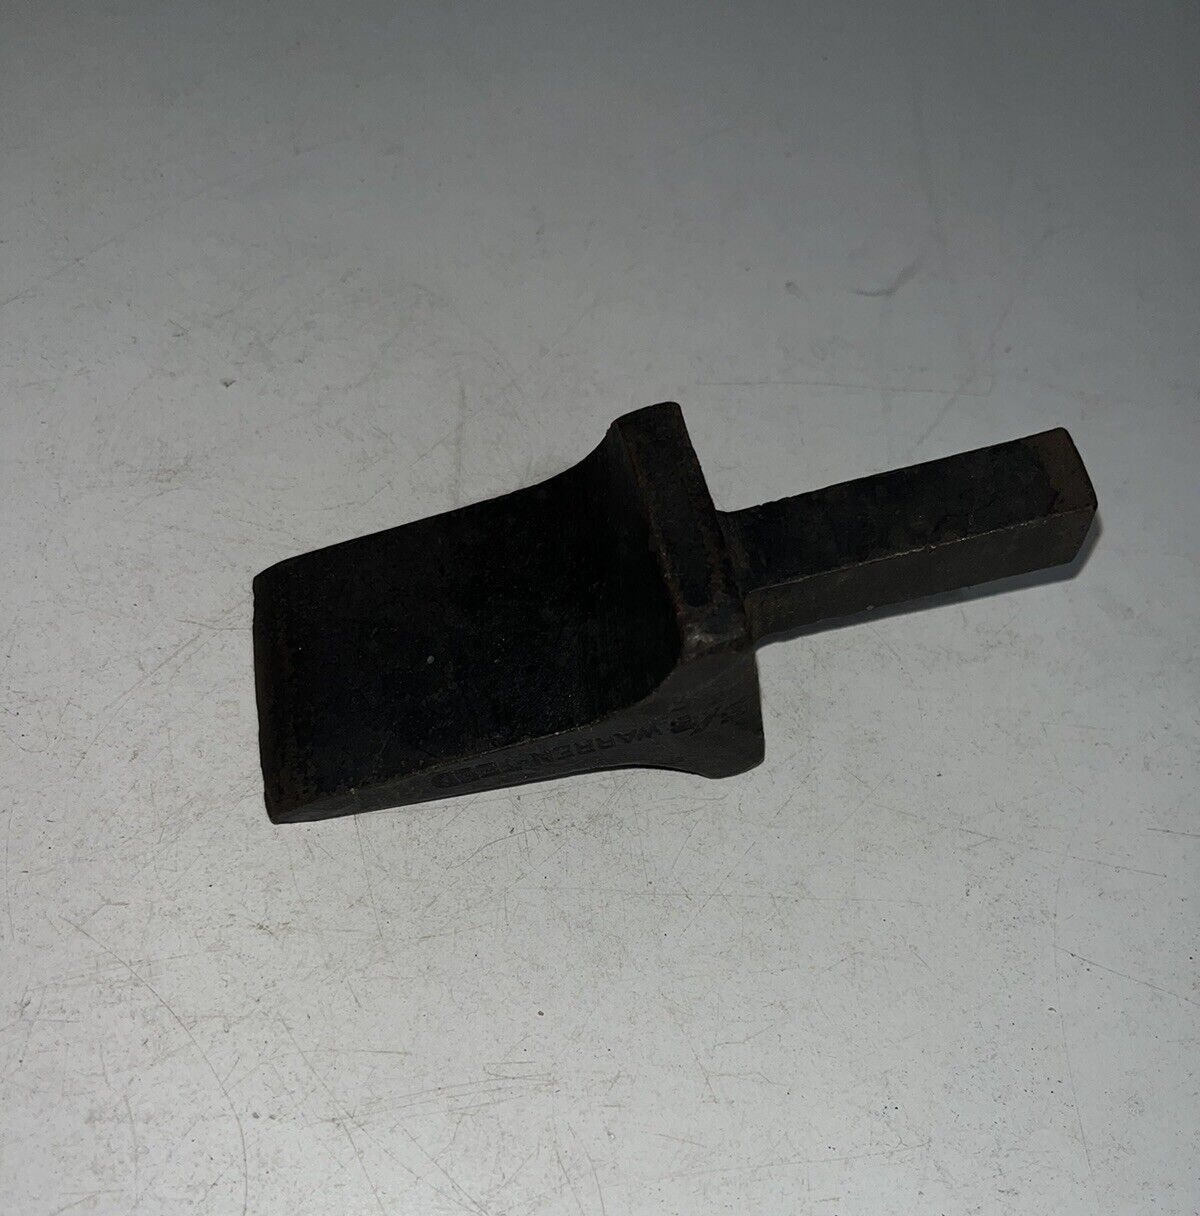 Blacksmith Hot Cut Anvil Vise Forge Hardie Shank Cutter Tool 5/8 Inch Hardy Hole